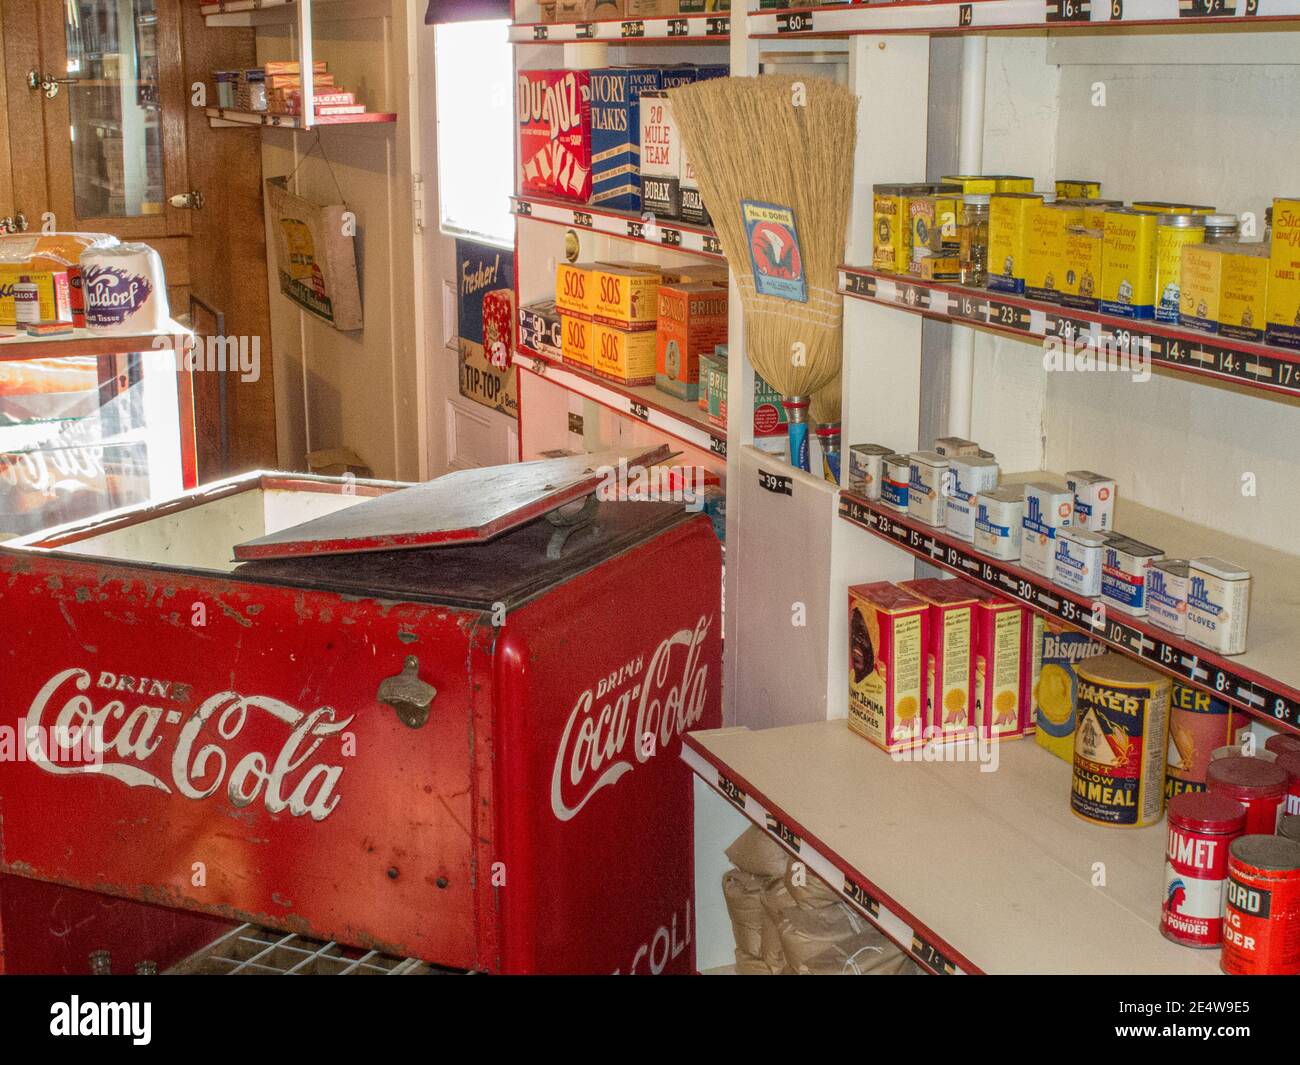 Groceries and a coca cola cooler inside The Little Corner Store at Strawberry Bank - Portsmouth, New Hampshire Stock Photo